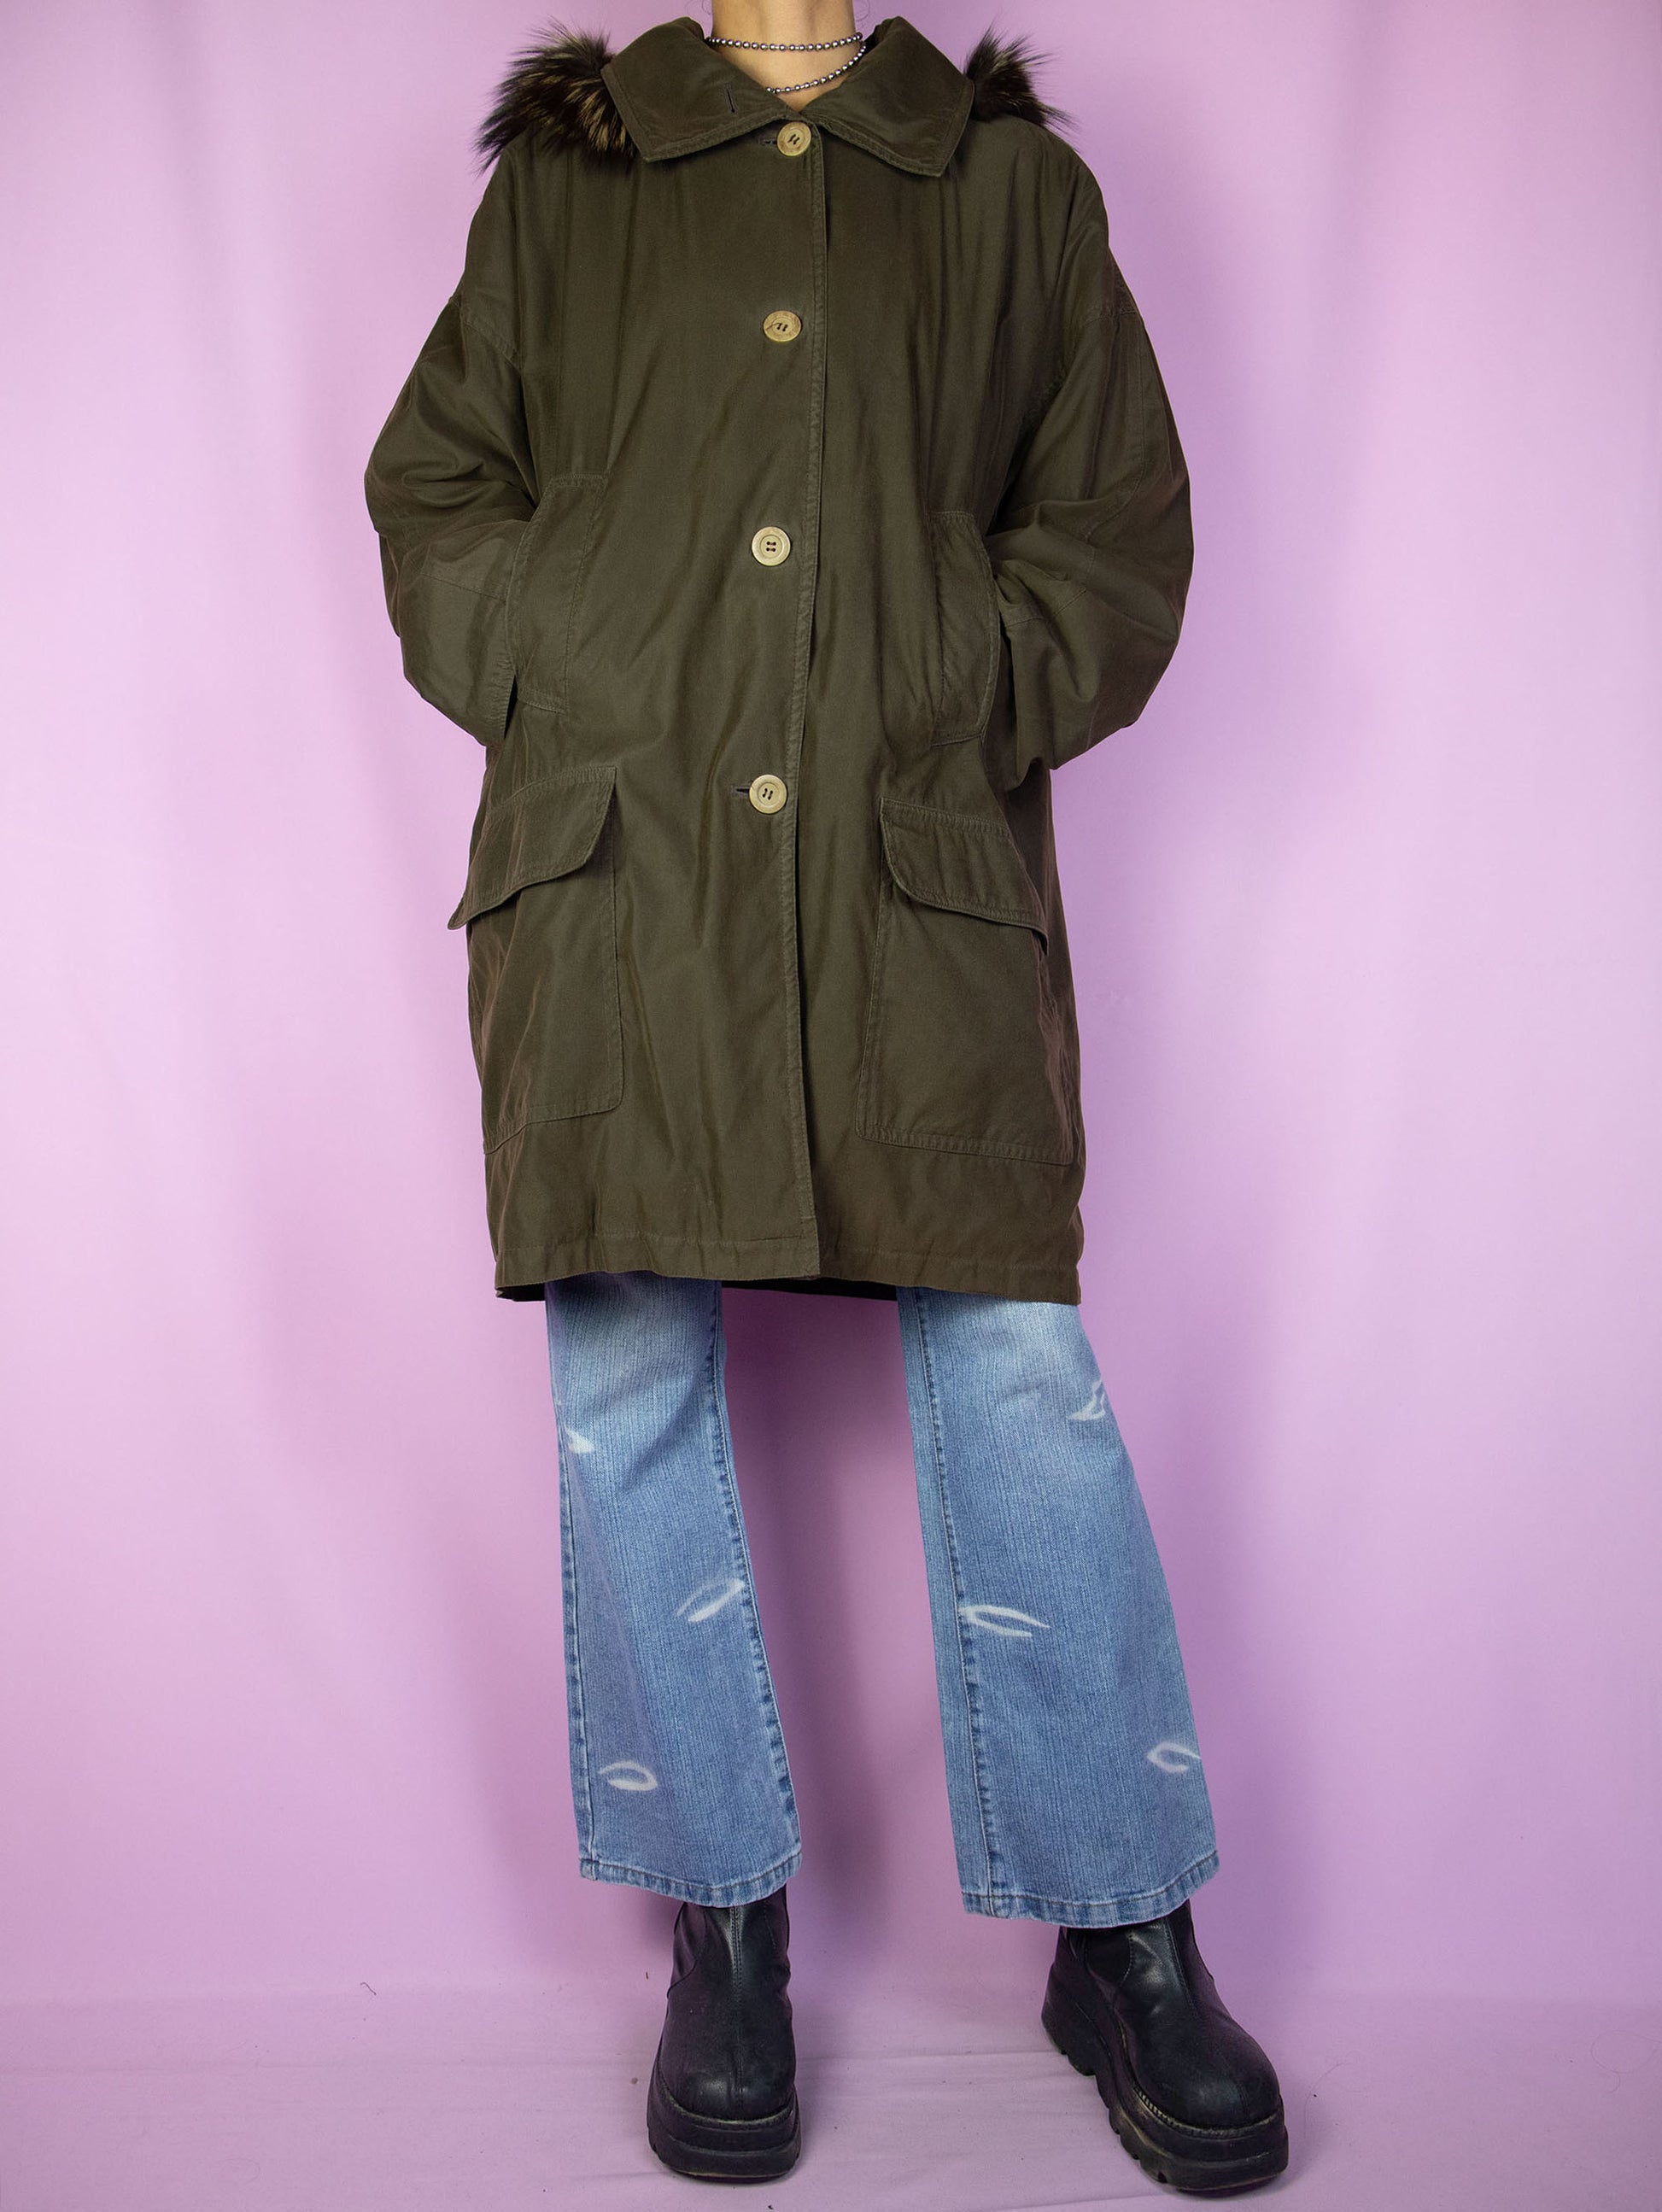 The Vintage 90's Dark Green Parka Jacket is a dark greenish-brown coat with pockets, buttons, and a removable hood with fur. A classic retro grunge winter coat from the 1990s.